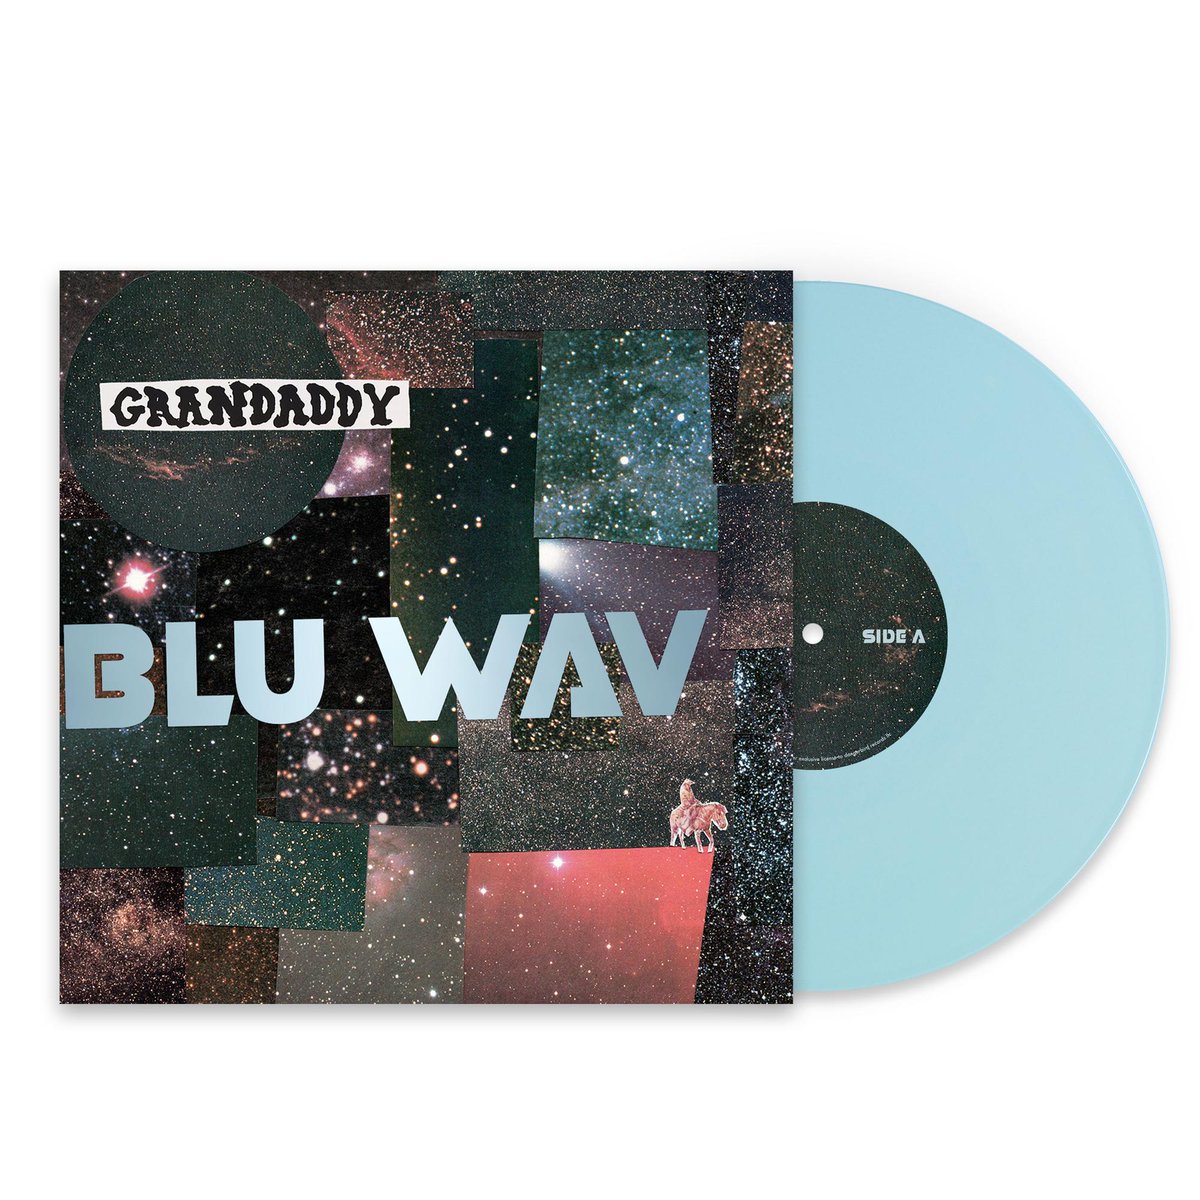 WIN! - A Vinyl Copy of Grandaddy's 'Blu Wav' Firm shop favourites Grandaddy make a welcome return next week with their first LP since 2017. Simply like, share, and give us a follow to be entered into our virtual competition draw. @Grandaddy @dangerbird normanrecords.com/records/200361…